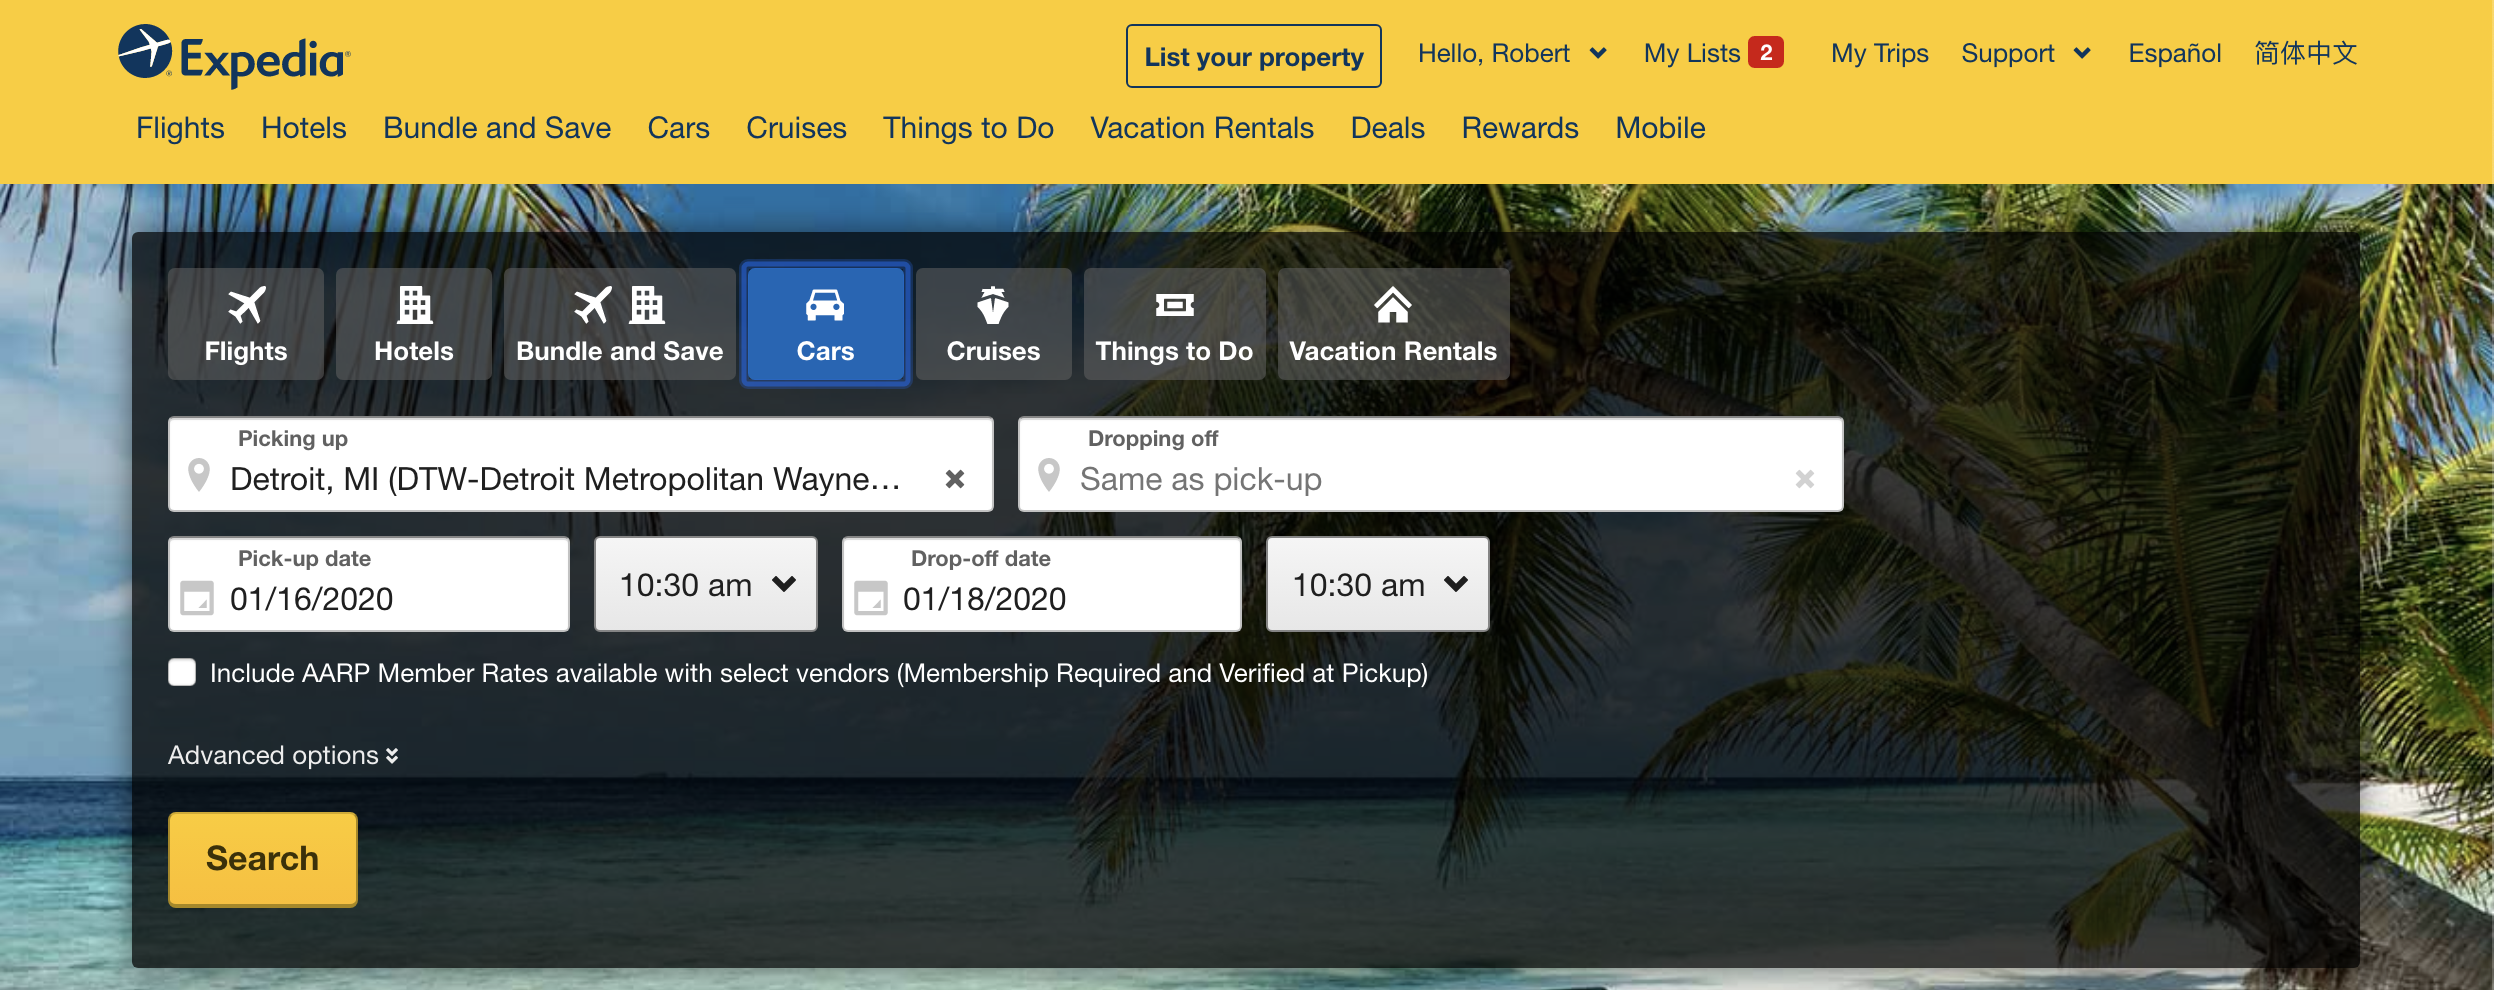 expedia home page